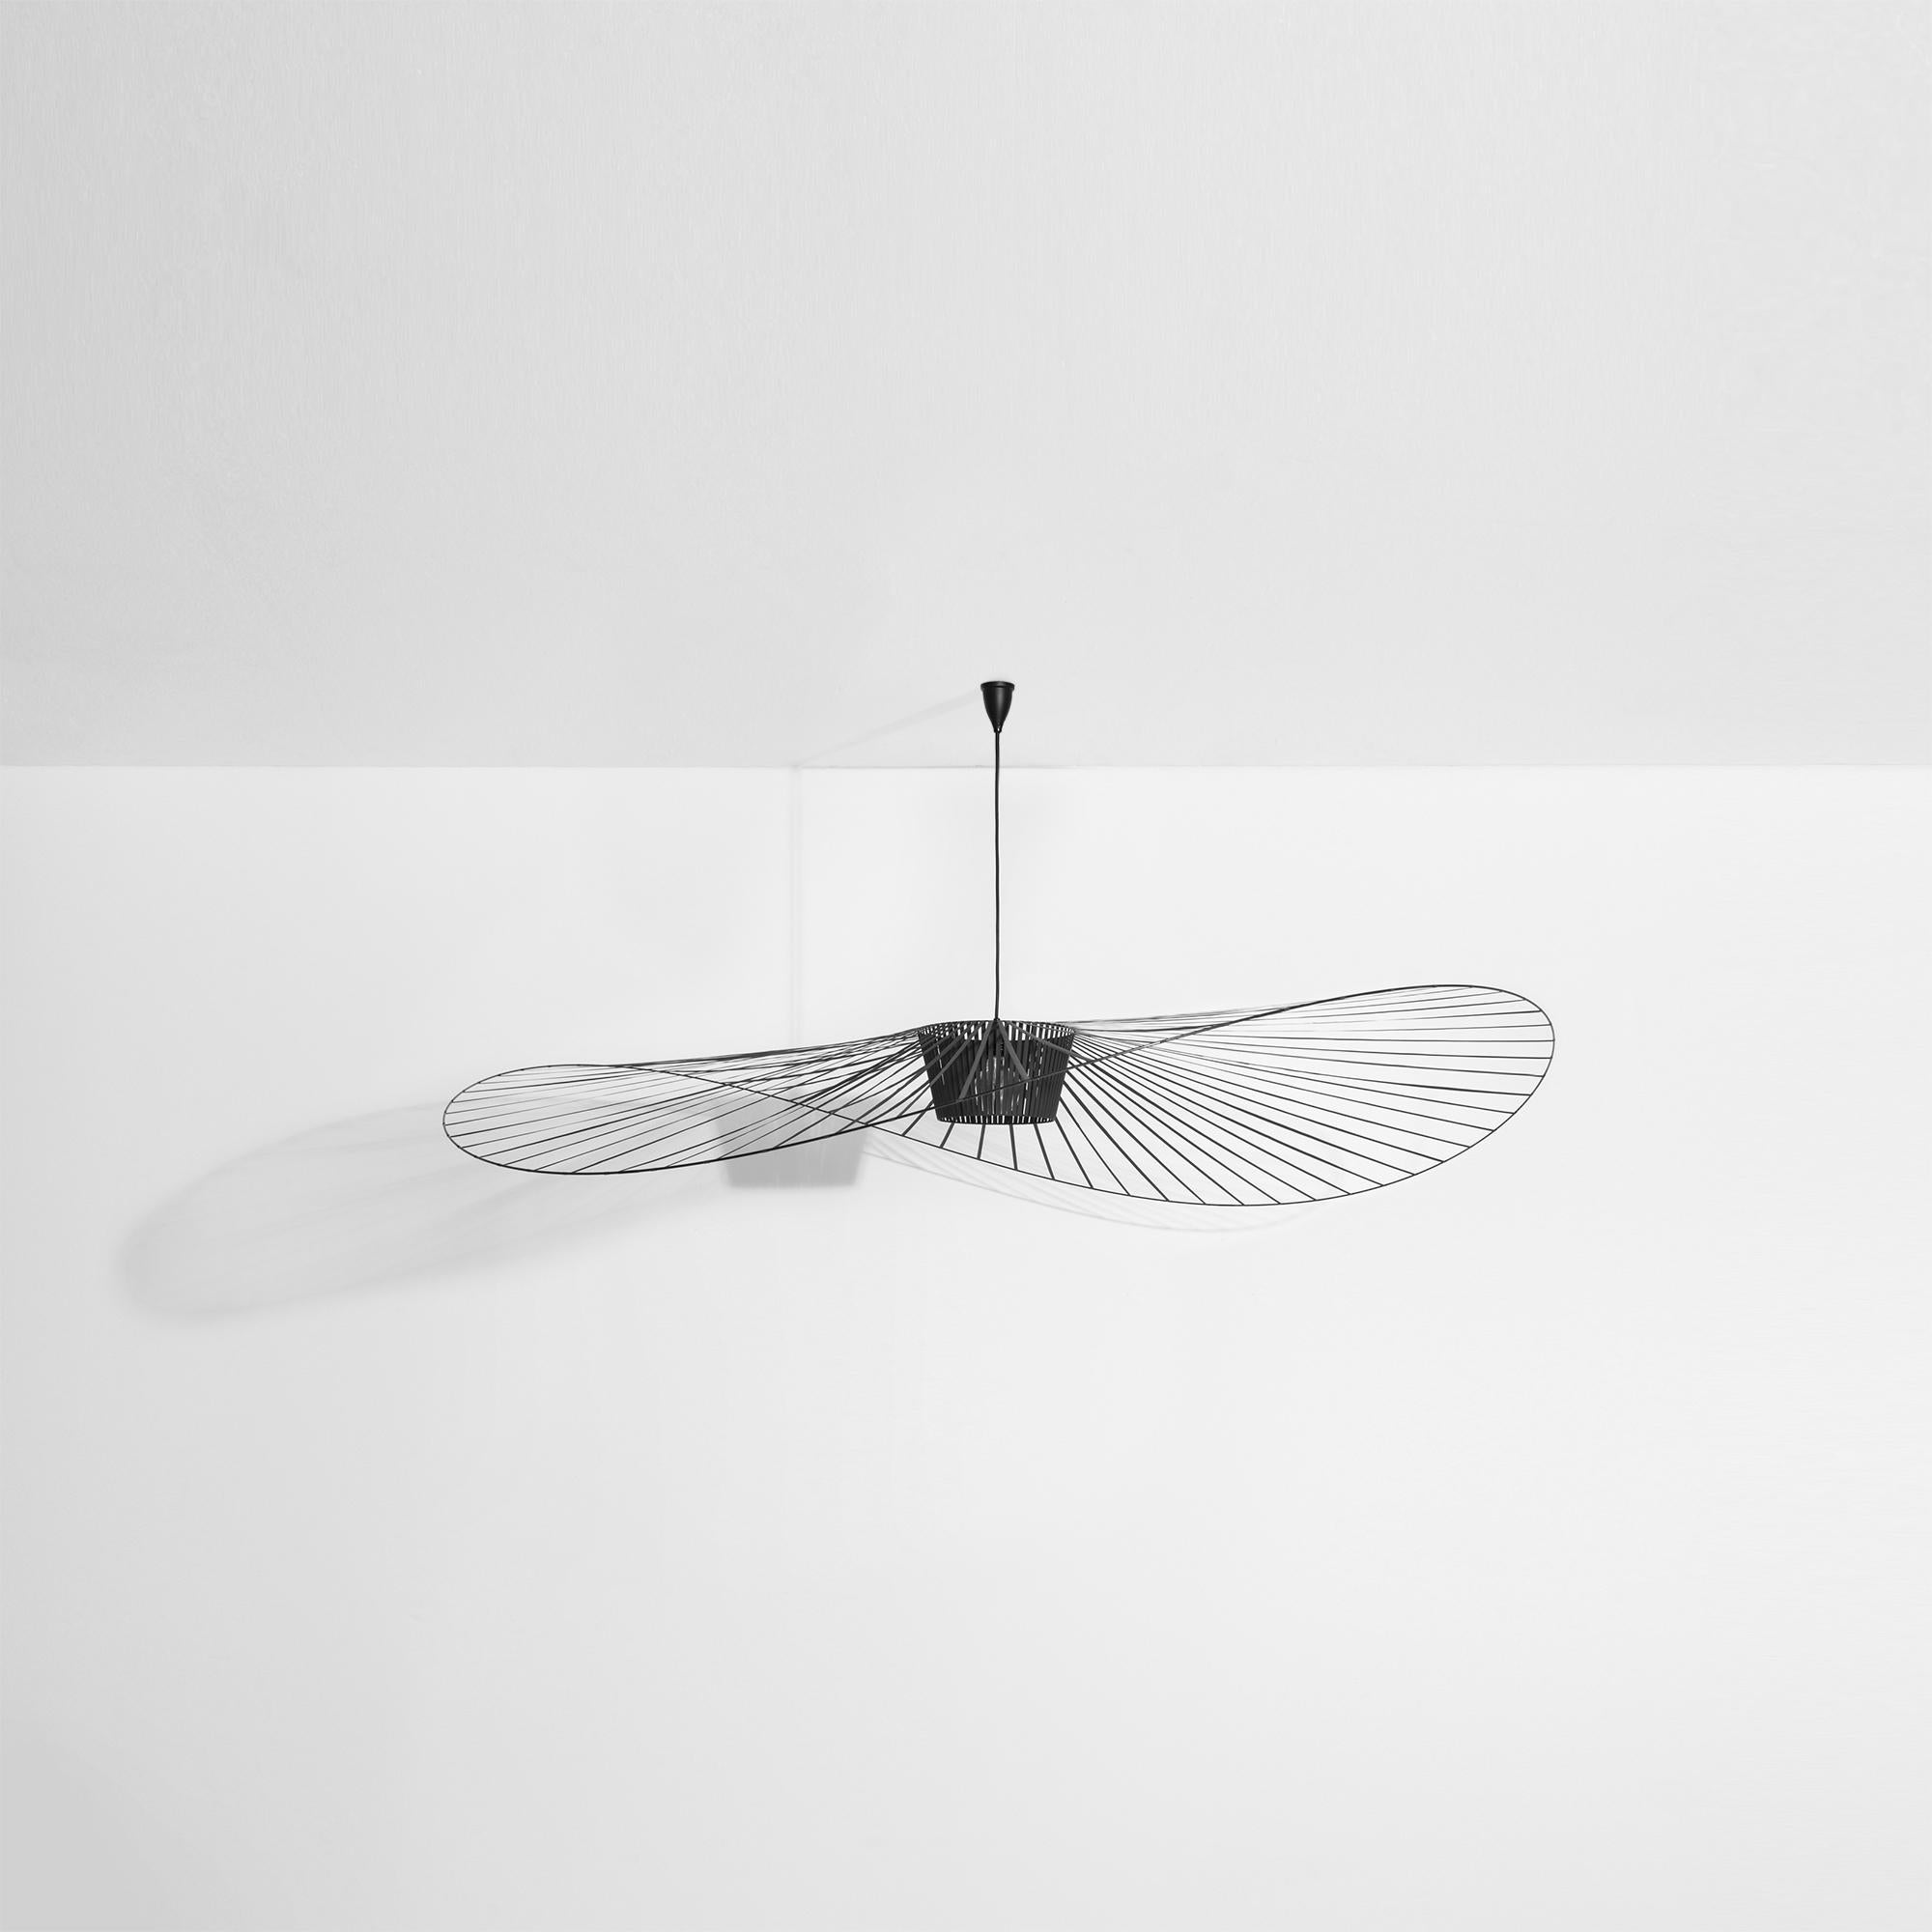 Petite Friture Large Vertigo Pendant Light in Black by Constance Guisset, 2010

Edited by Petite Friture in 2010, the Vertigo pendant light is now an icon of contemporary design. With its ultra-light fiberglass structure, stretched with velvety